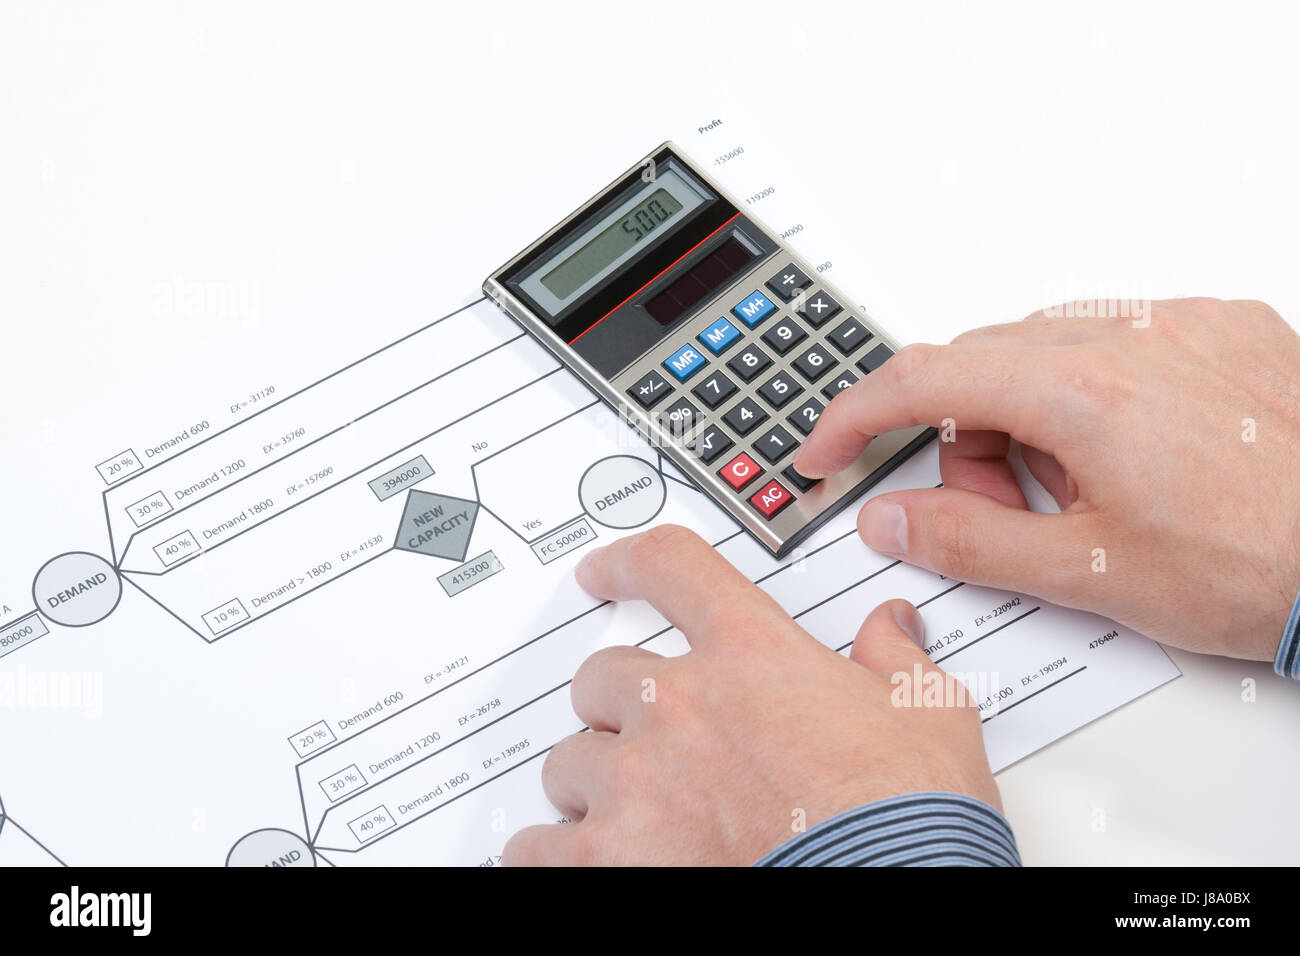 tree, business dealings, deal, business transaction, business, bussiness, work, Stock Photo